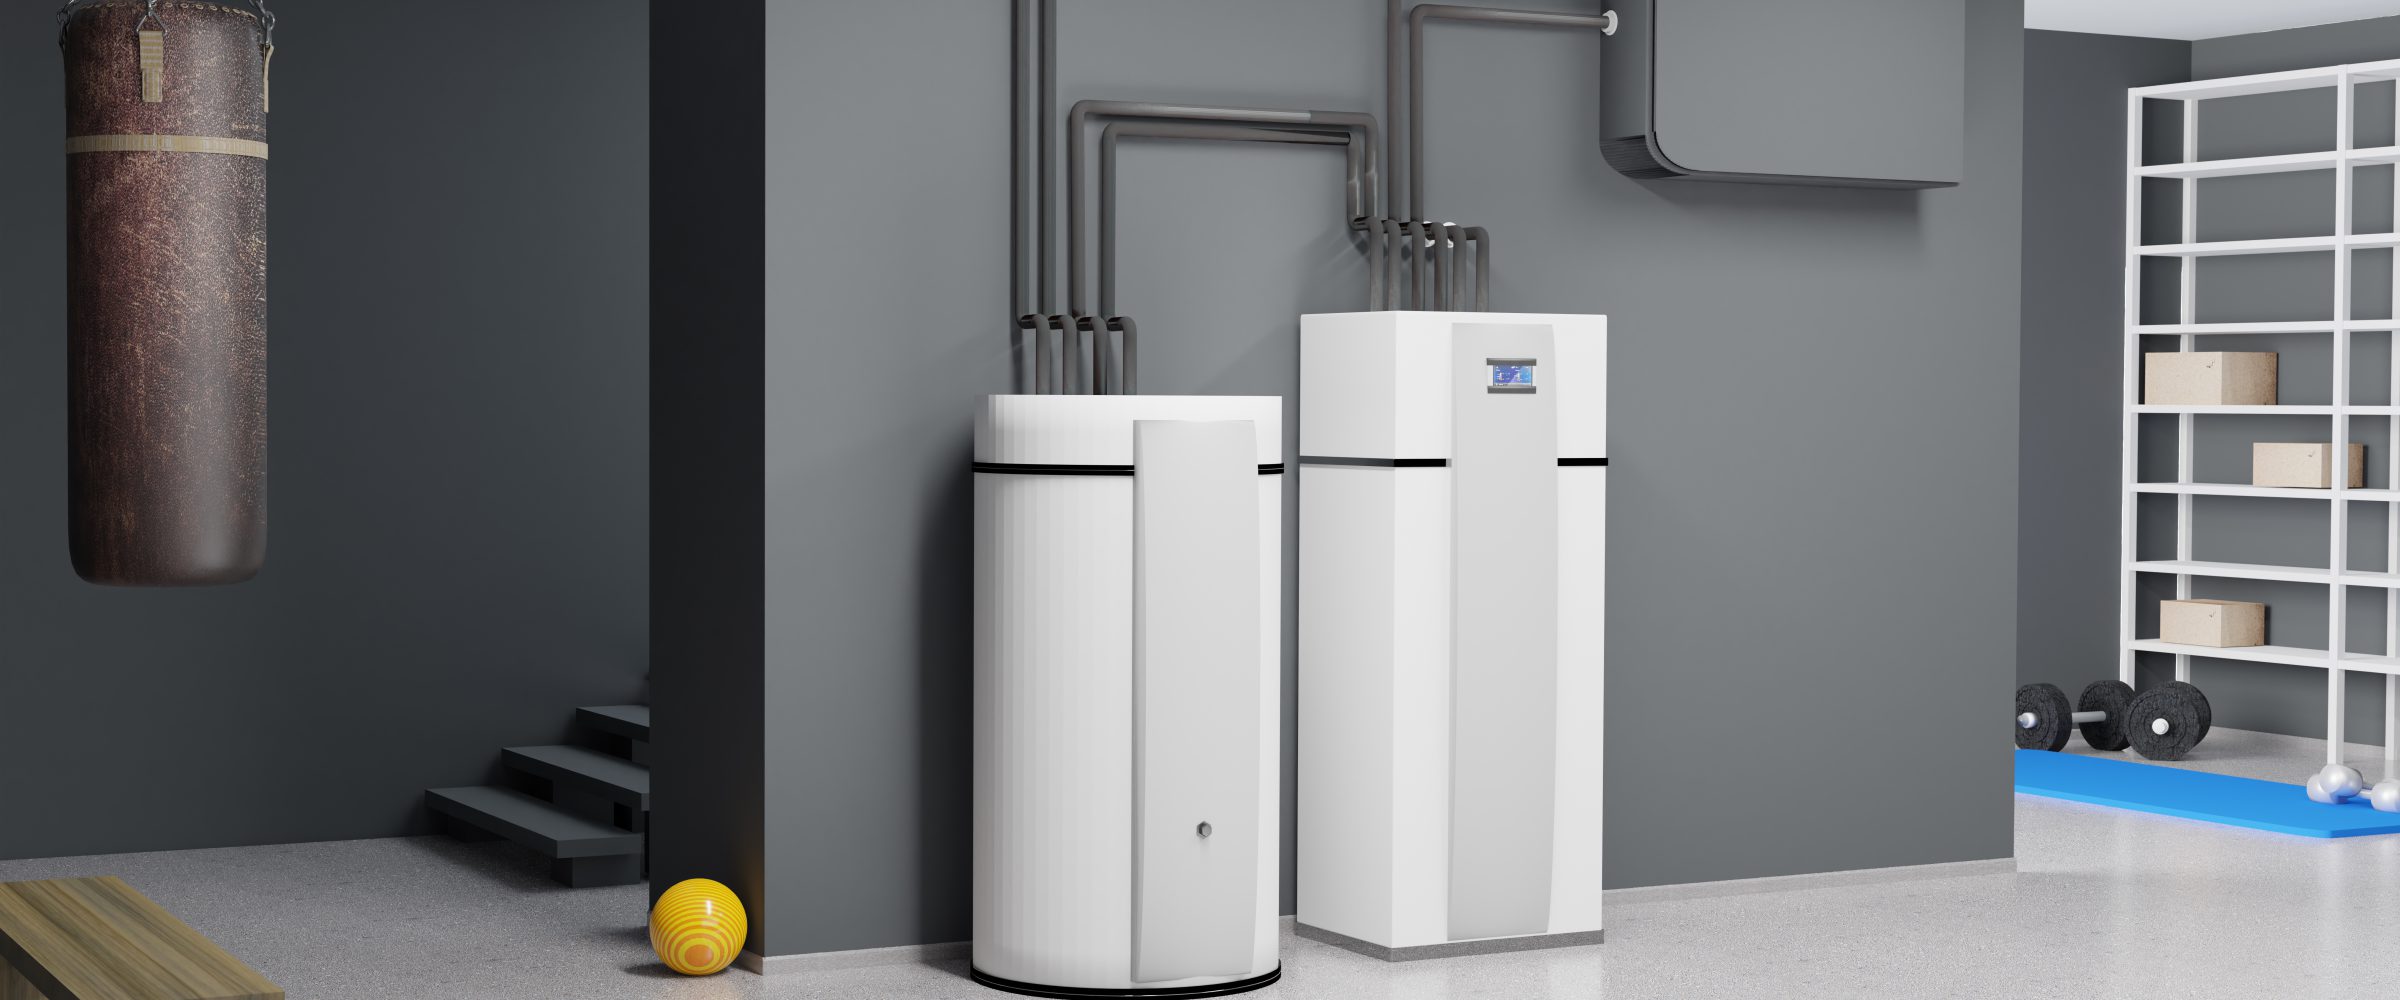 A modern heating system for private households, 3D illustration